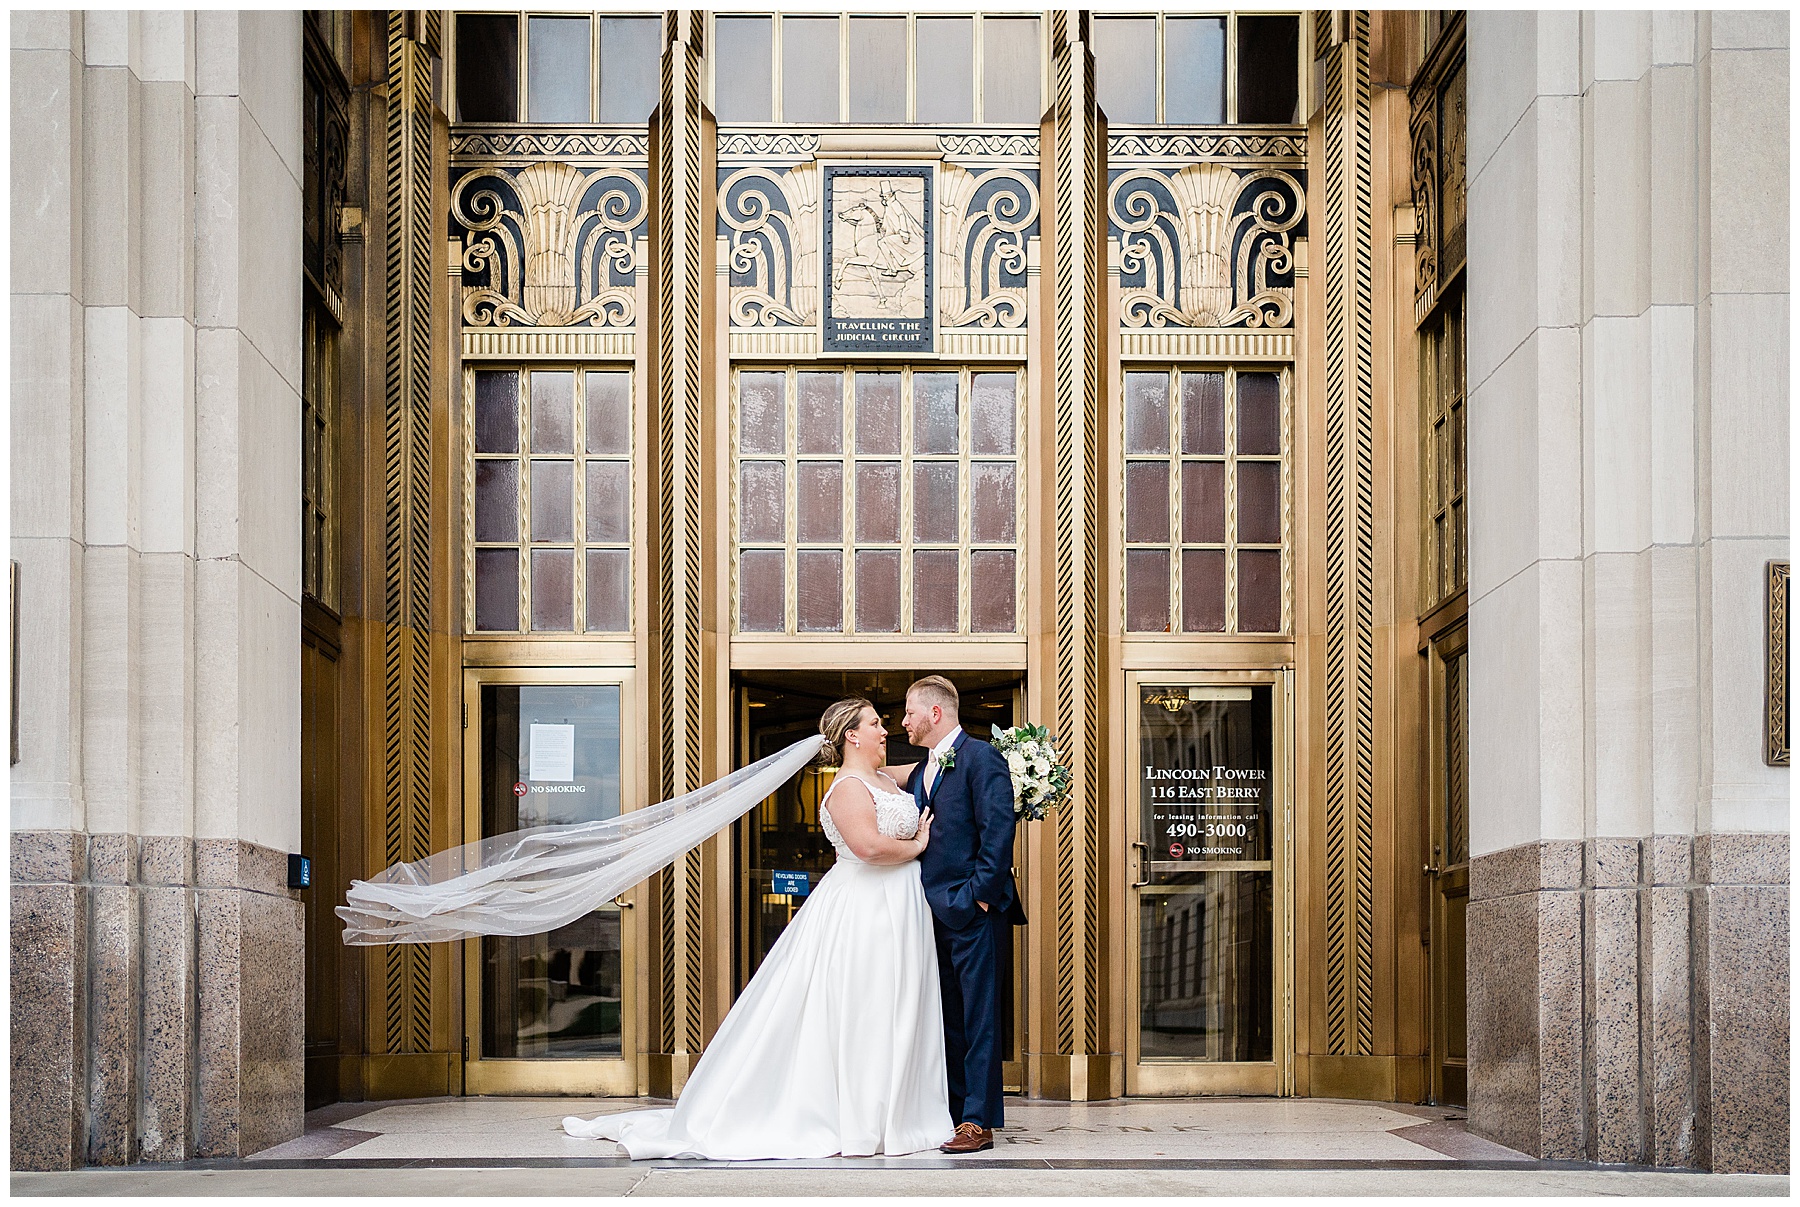 Fort Wayne wedding photography with bride and groom embracing outside of their wedding venue as the brides veil slows in the wind